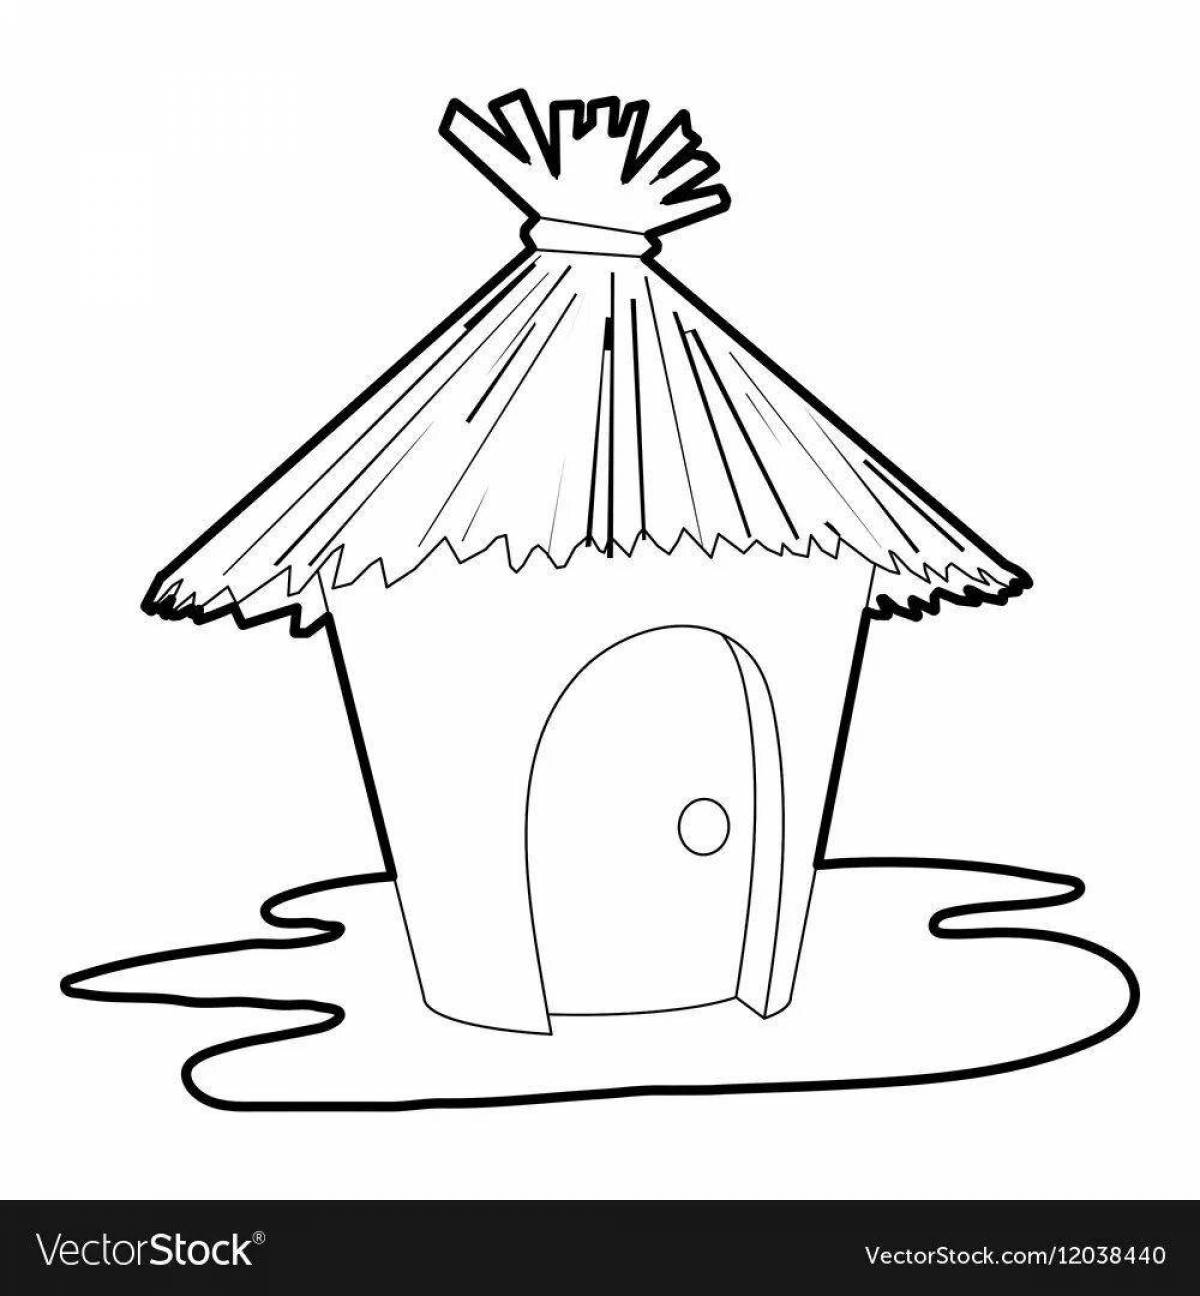 Rampant hut coloring pages for kids